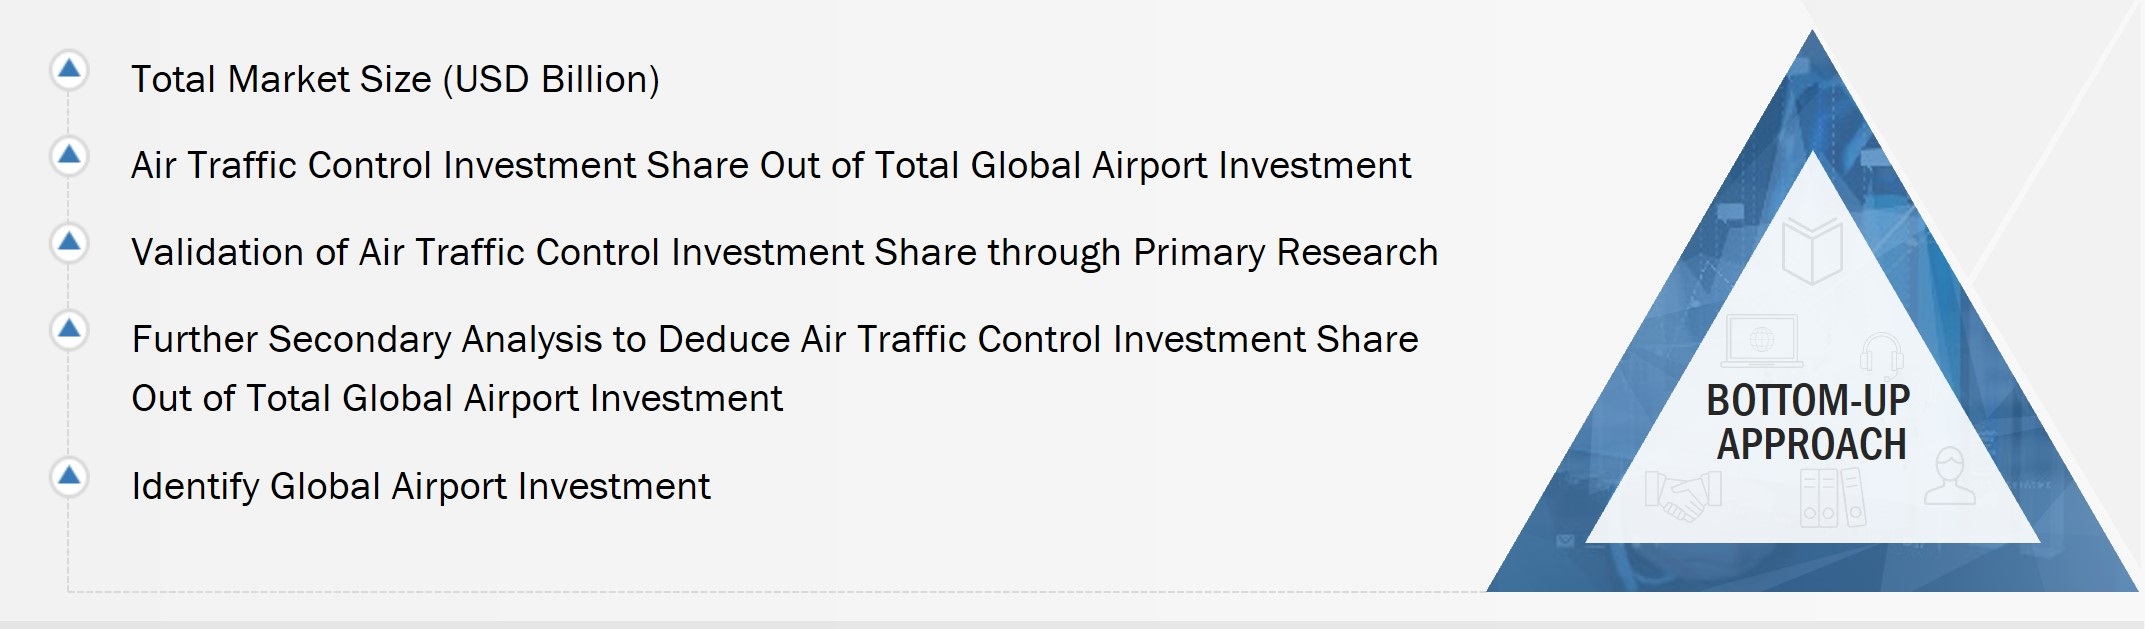 Air Traffic Control (ATC) Market Size, and Bottom-Up Approach 